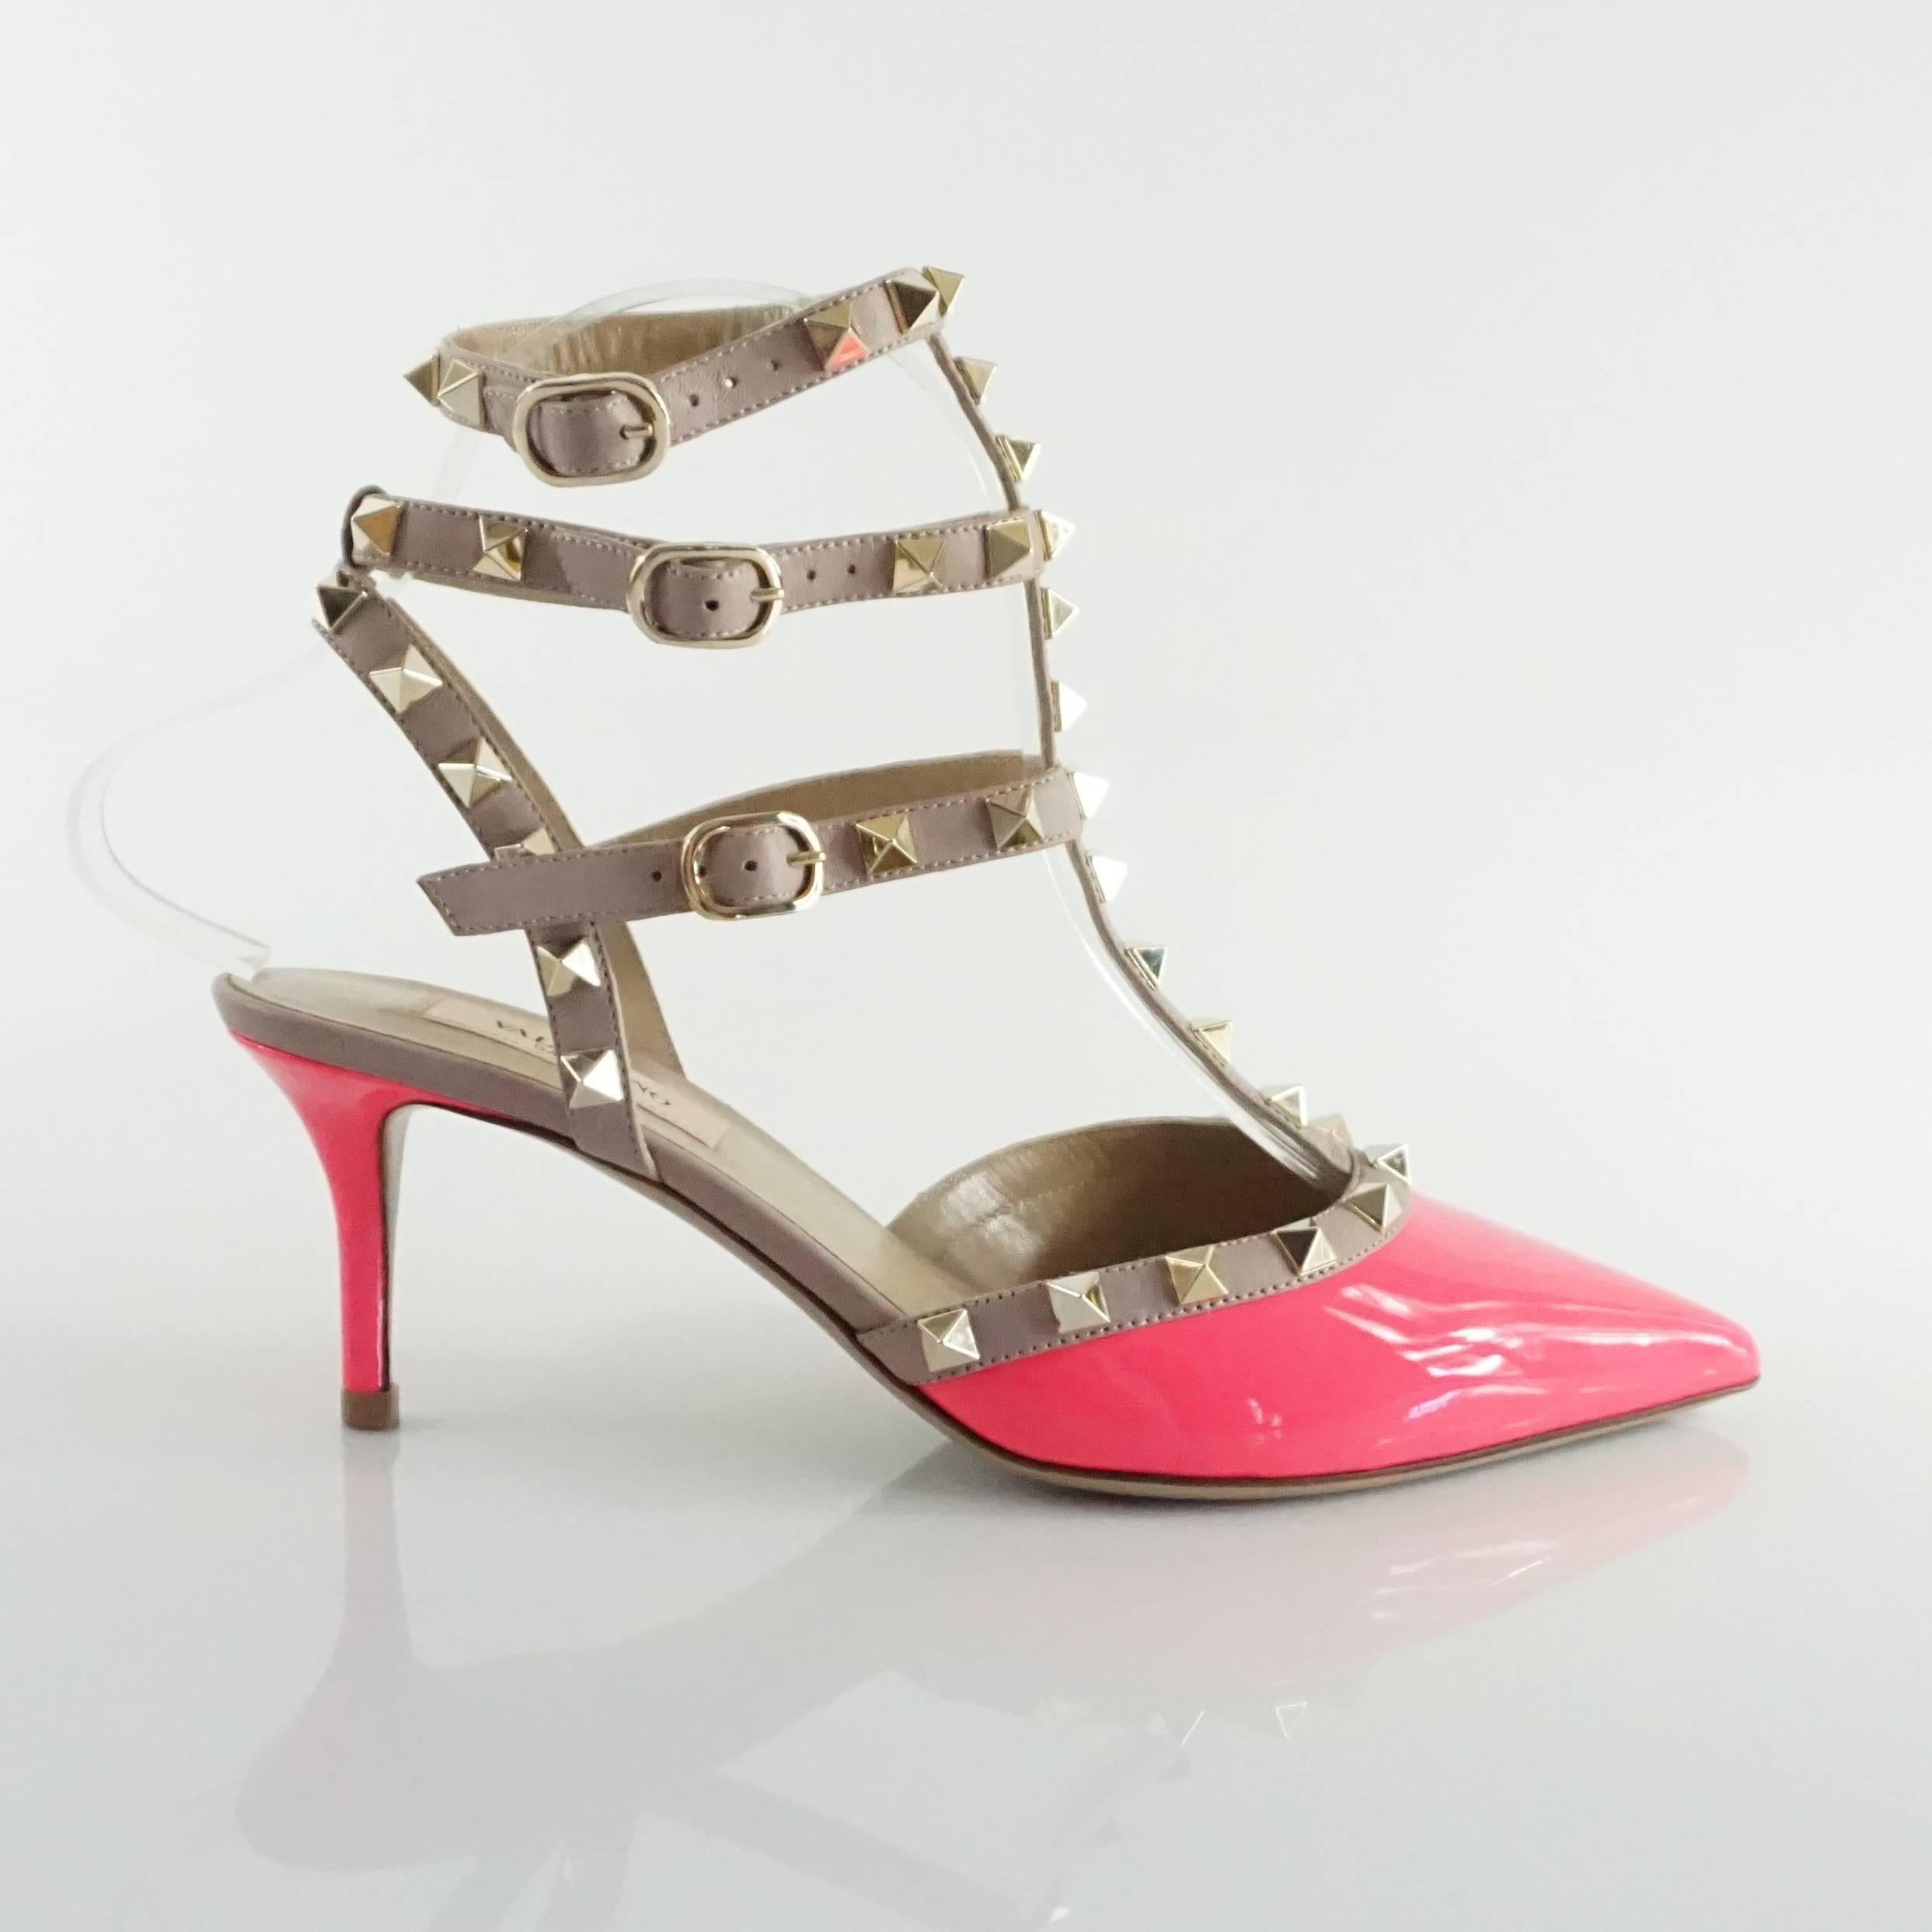 These Valentino heels are neon pink and taupe patent leather with rock studs. They features a pointed toe, a kitten heel, and ankle strap covered in rock studs. These shoes are in excellent condition.

Heel Height: 2.75"